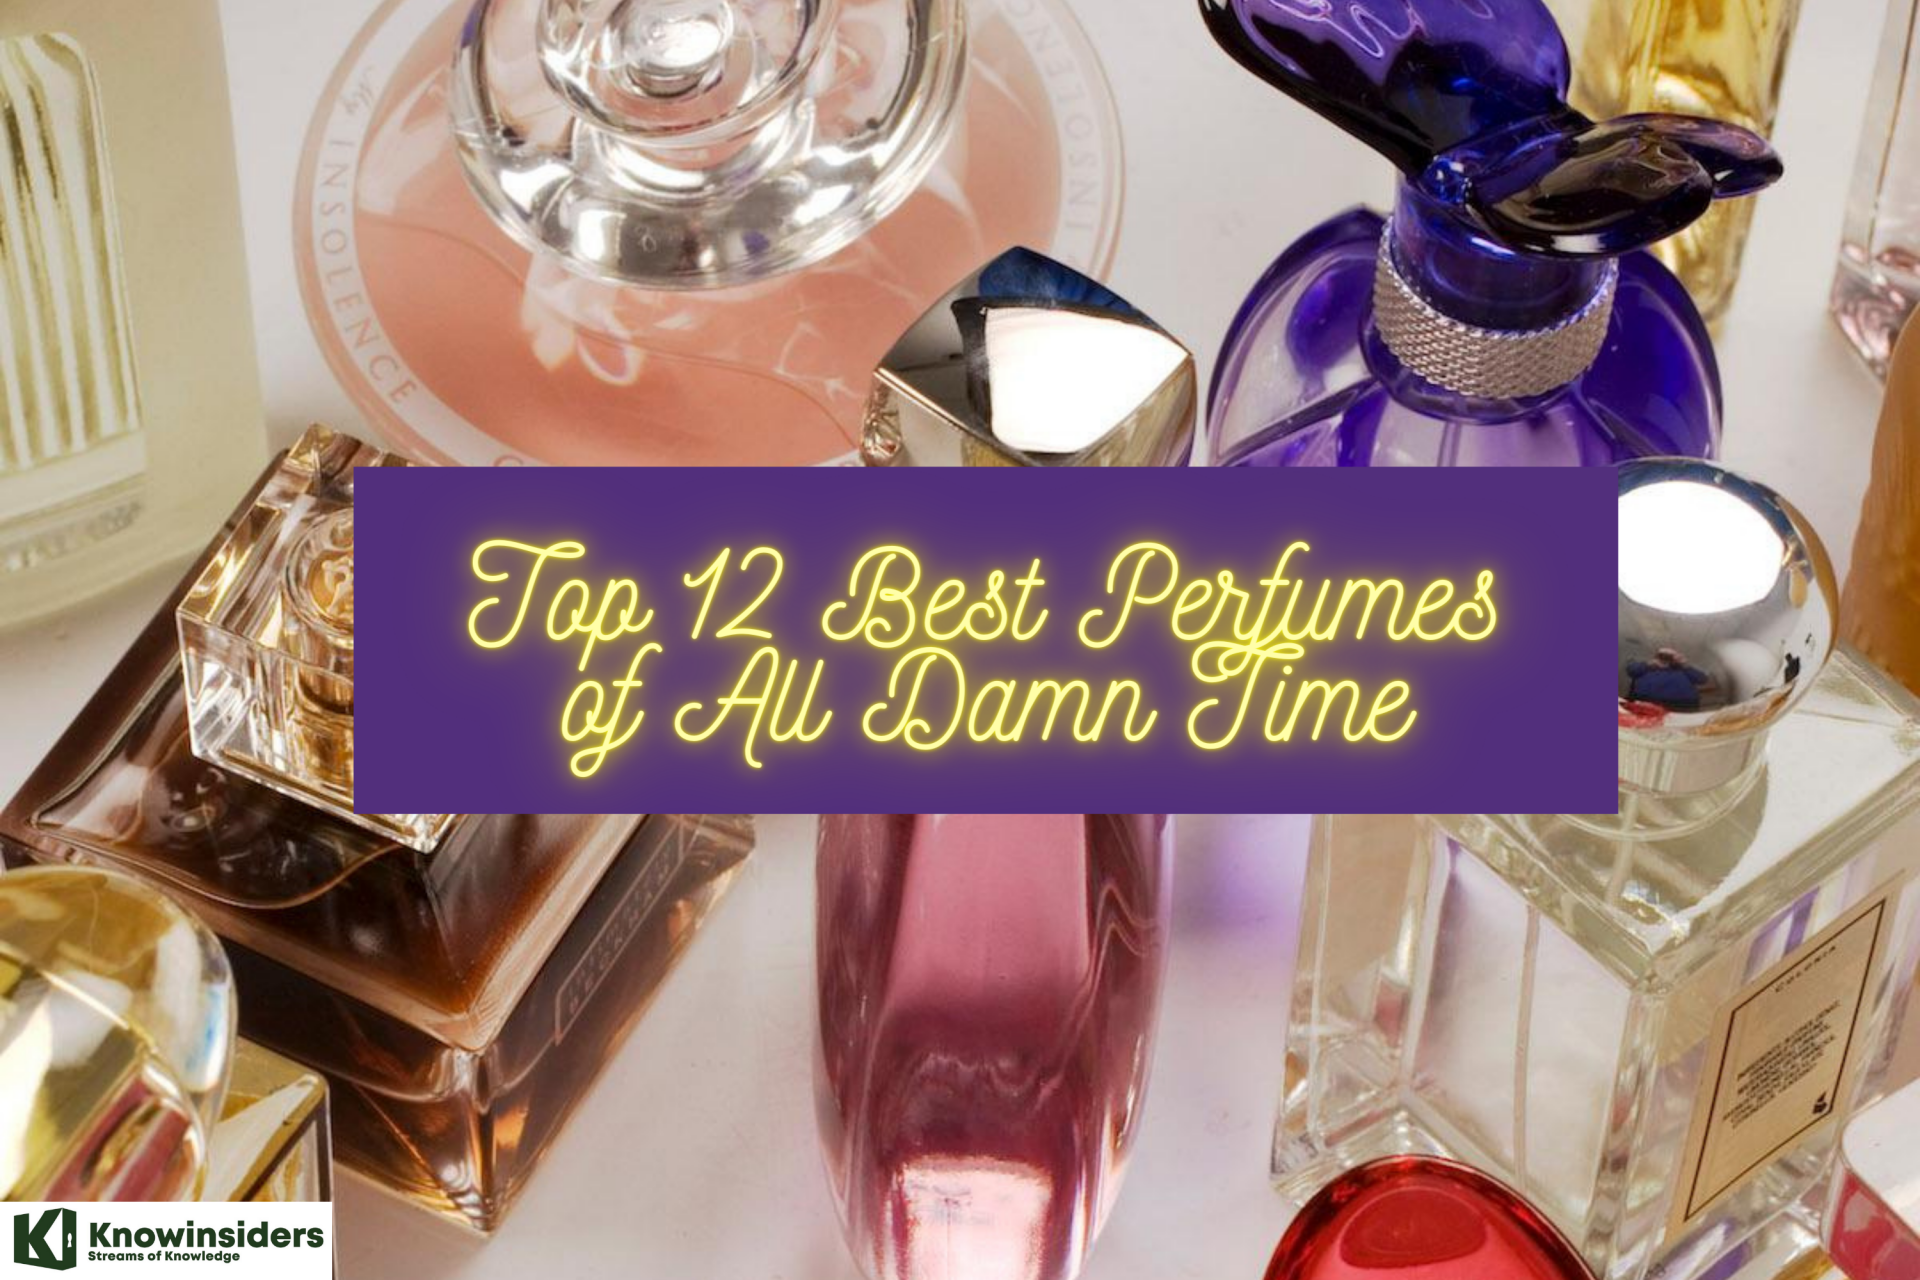 Top 12 Best Perfumes of All Damn Time. Photo: KnowInsiders